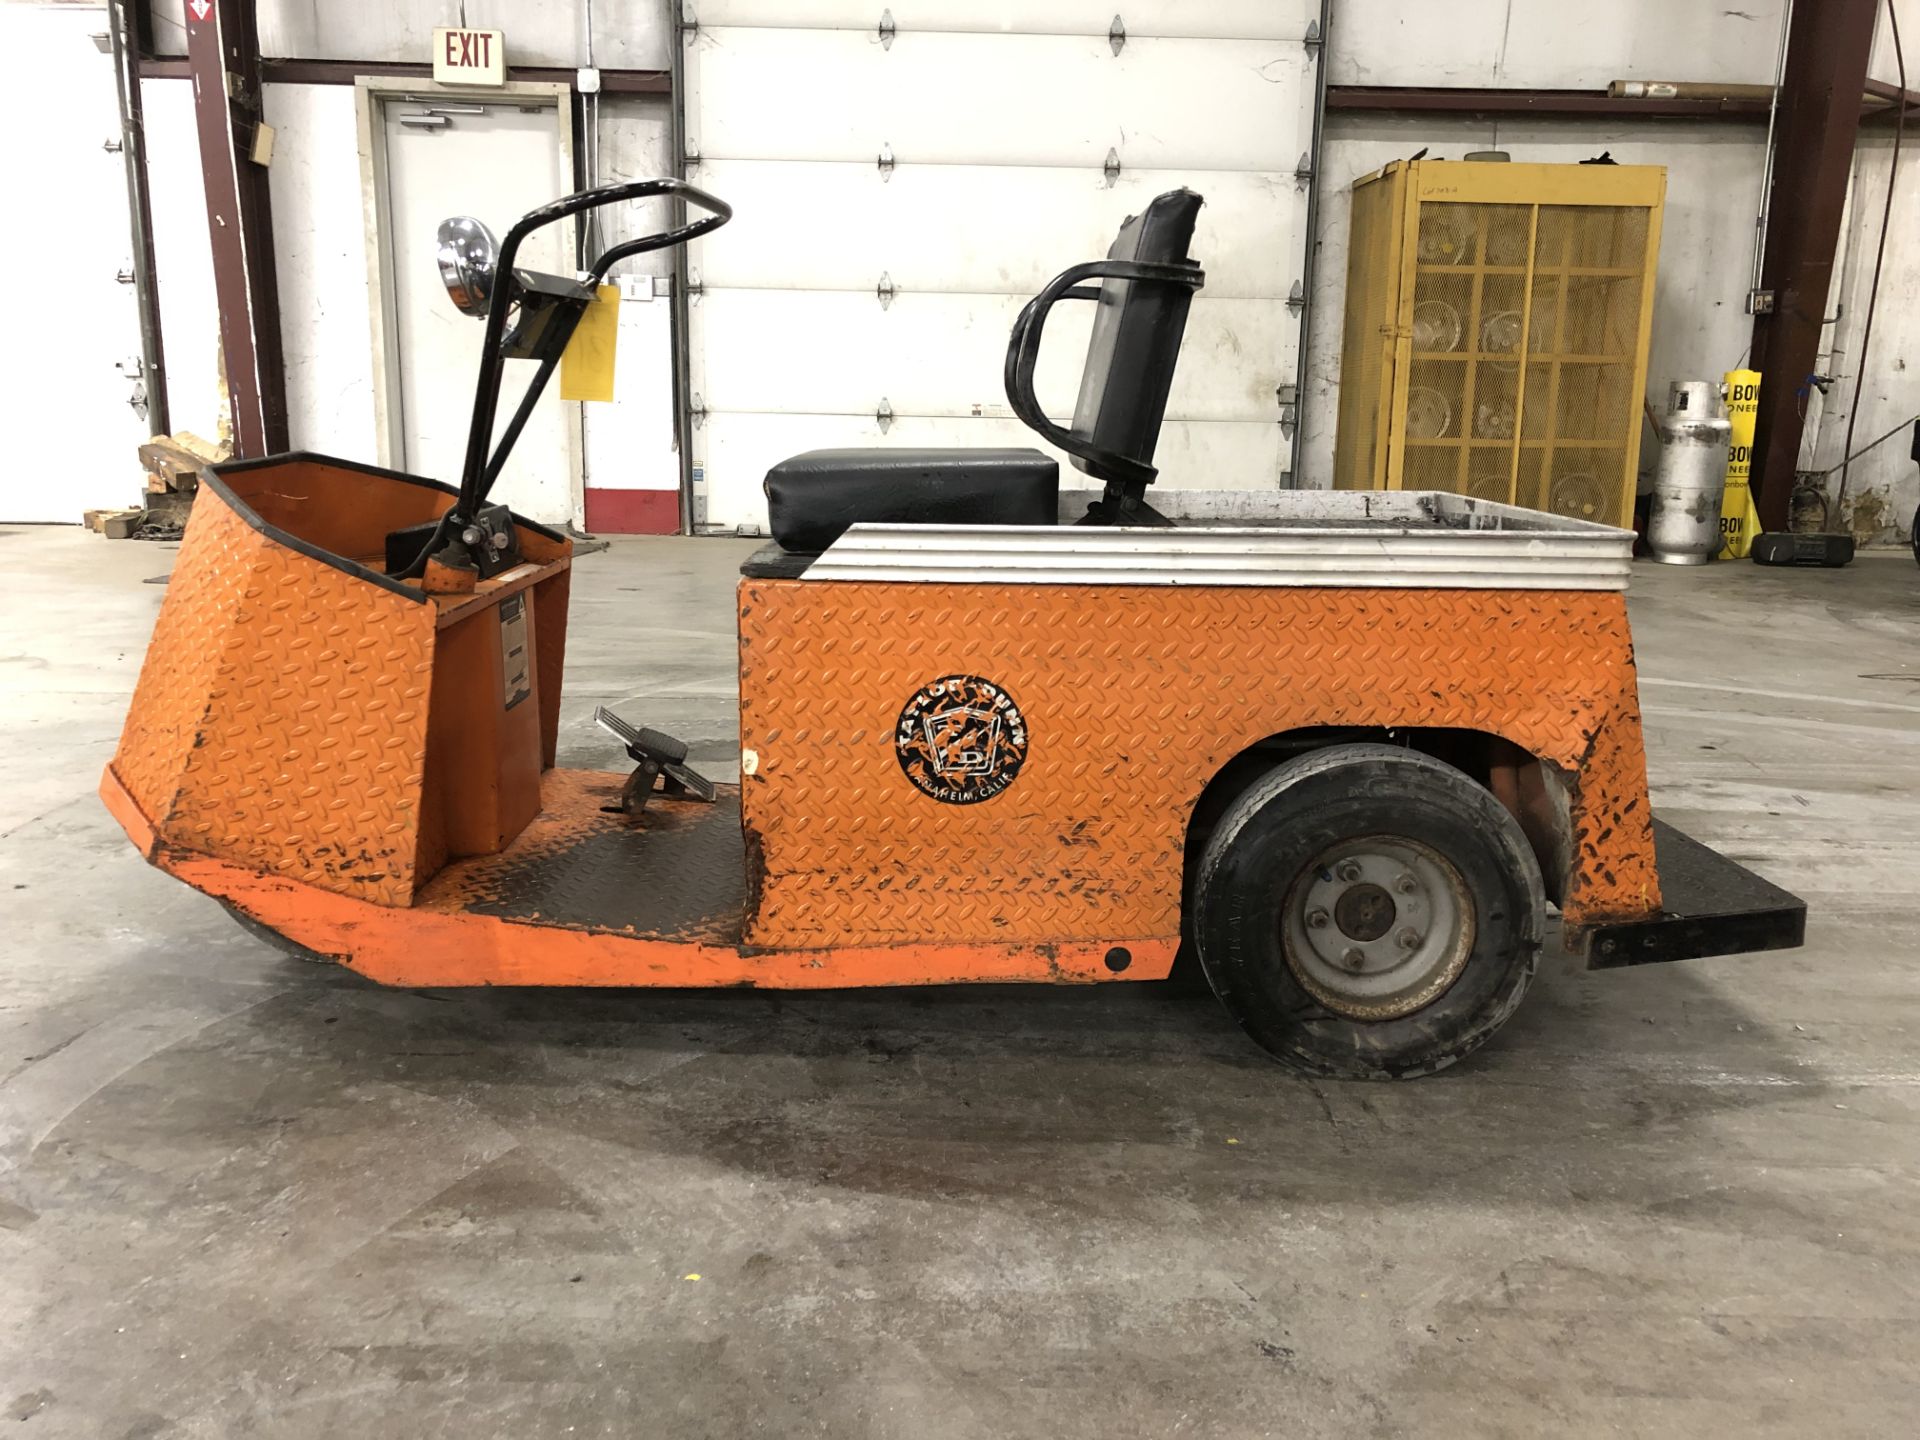 TAYLOR-DUNN ELECTRIC 3-WHEEL PERSONNEL CART, MODEL: S85-34, S/N: 39653, 24 VOLT, ON-BOARD CHARGER,